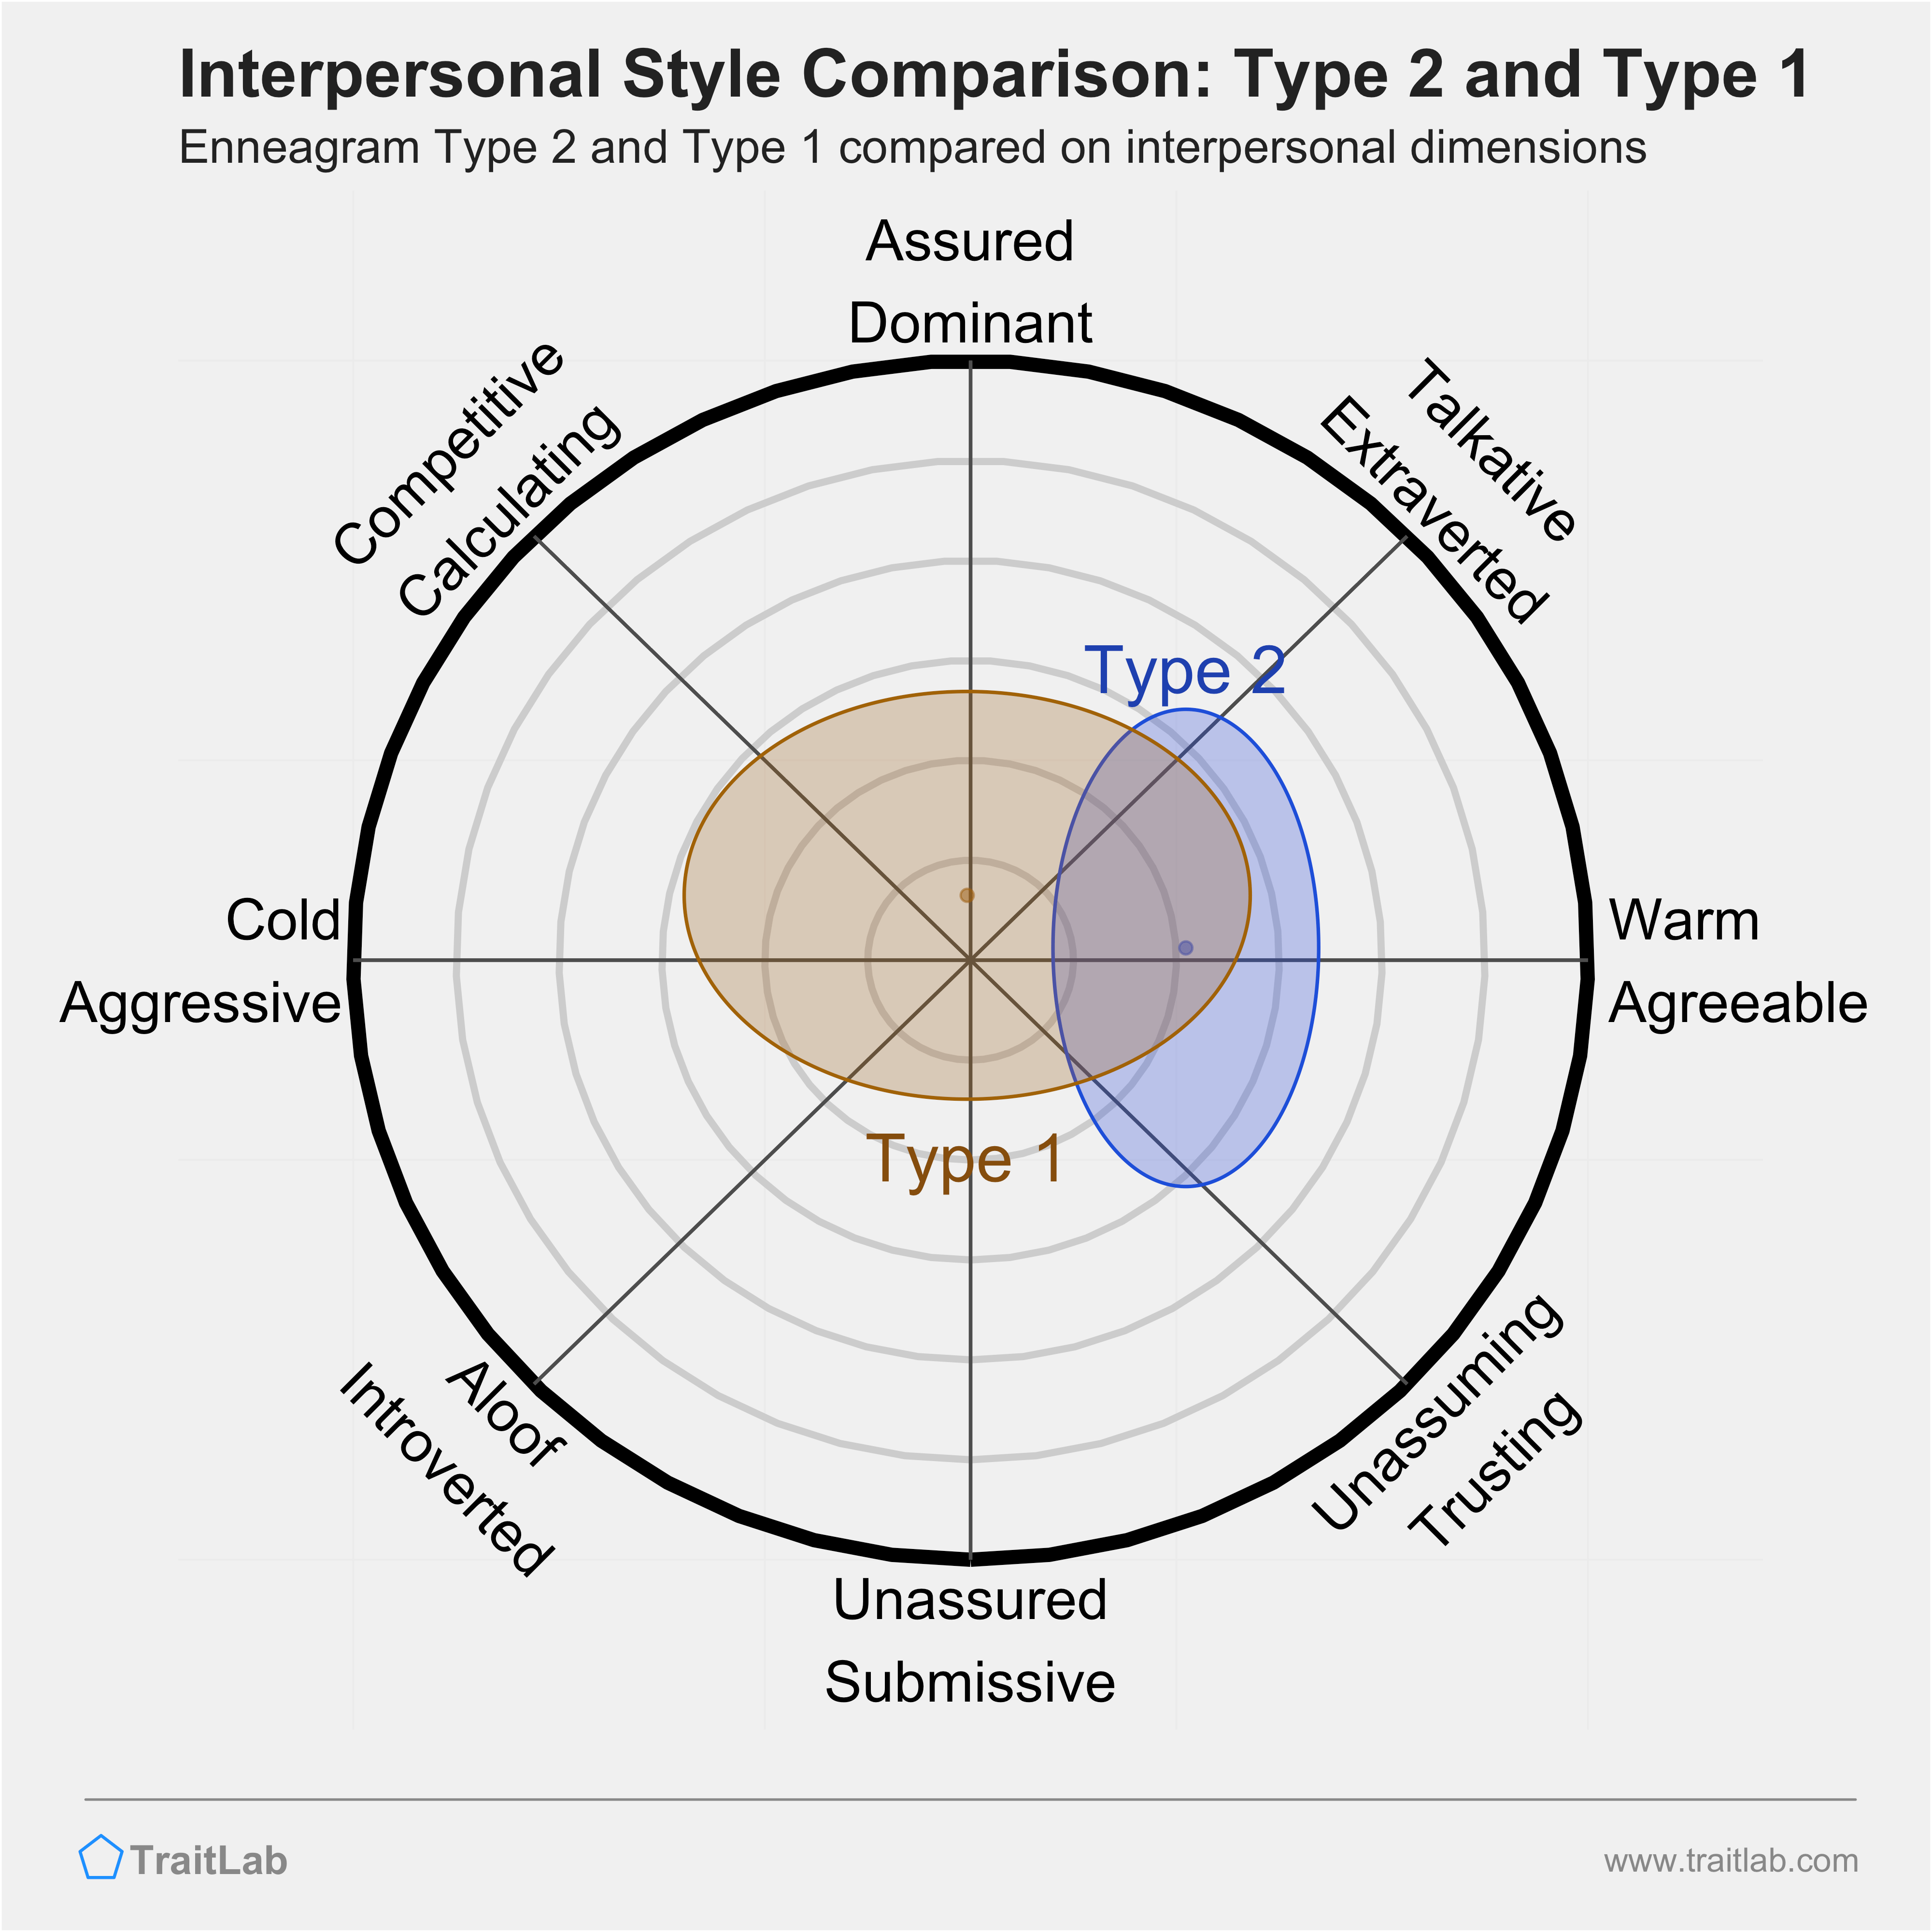 Enneagram Type 2 and Type 1 comparison across interpersonal dimensions